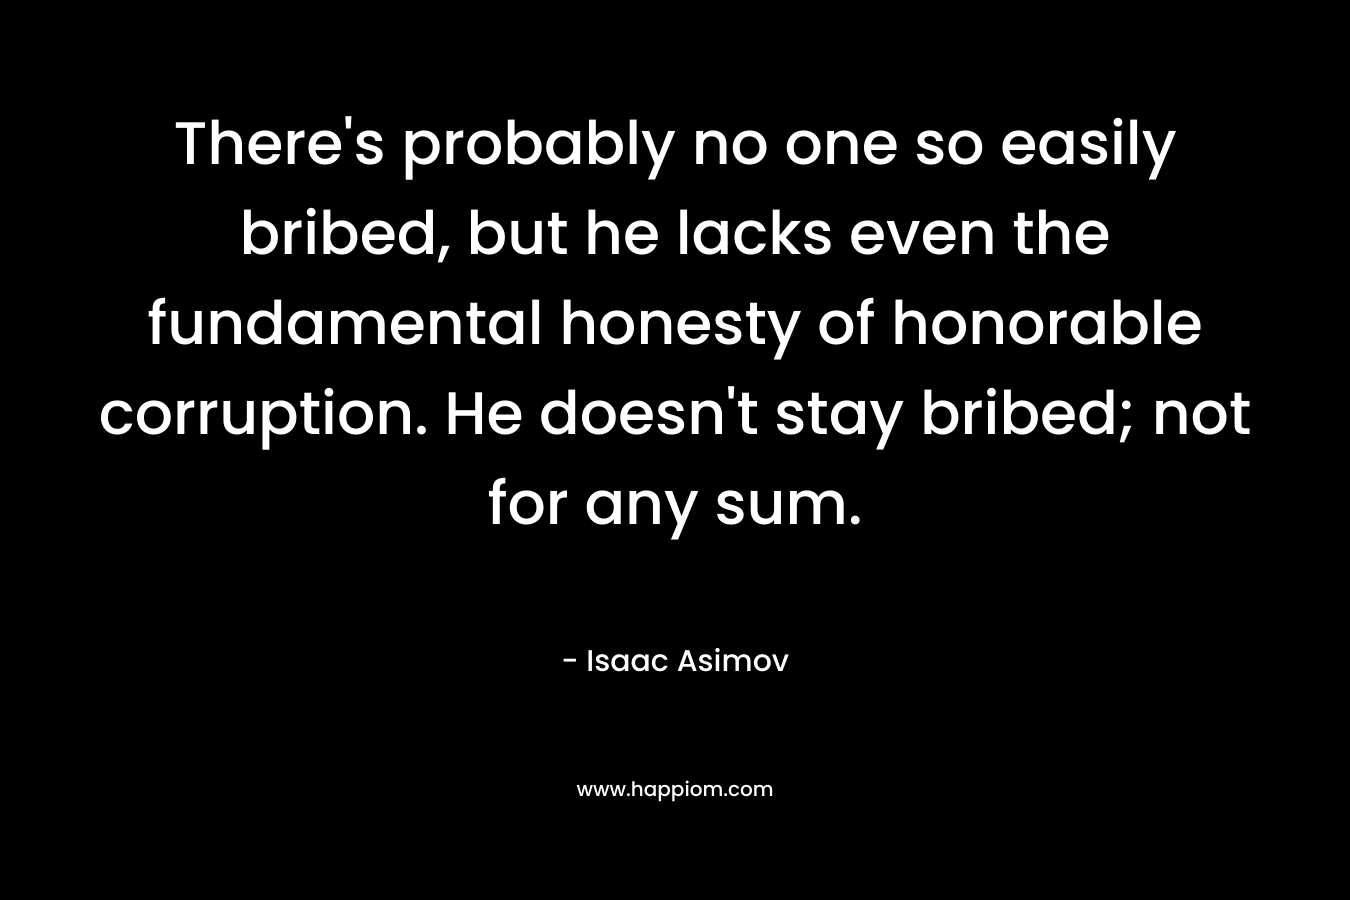 There’s probably no one so easily bribed, but he lacks even the fundamental honesty of honorable corruption. He doesn’t stay bribed; not for any sum. – Isaac Asimov